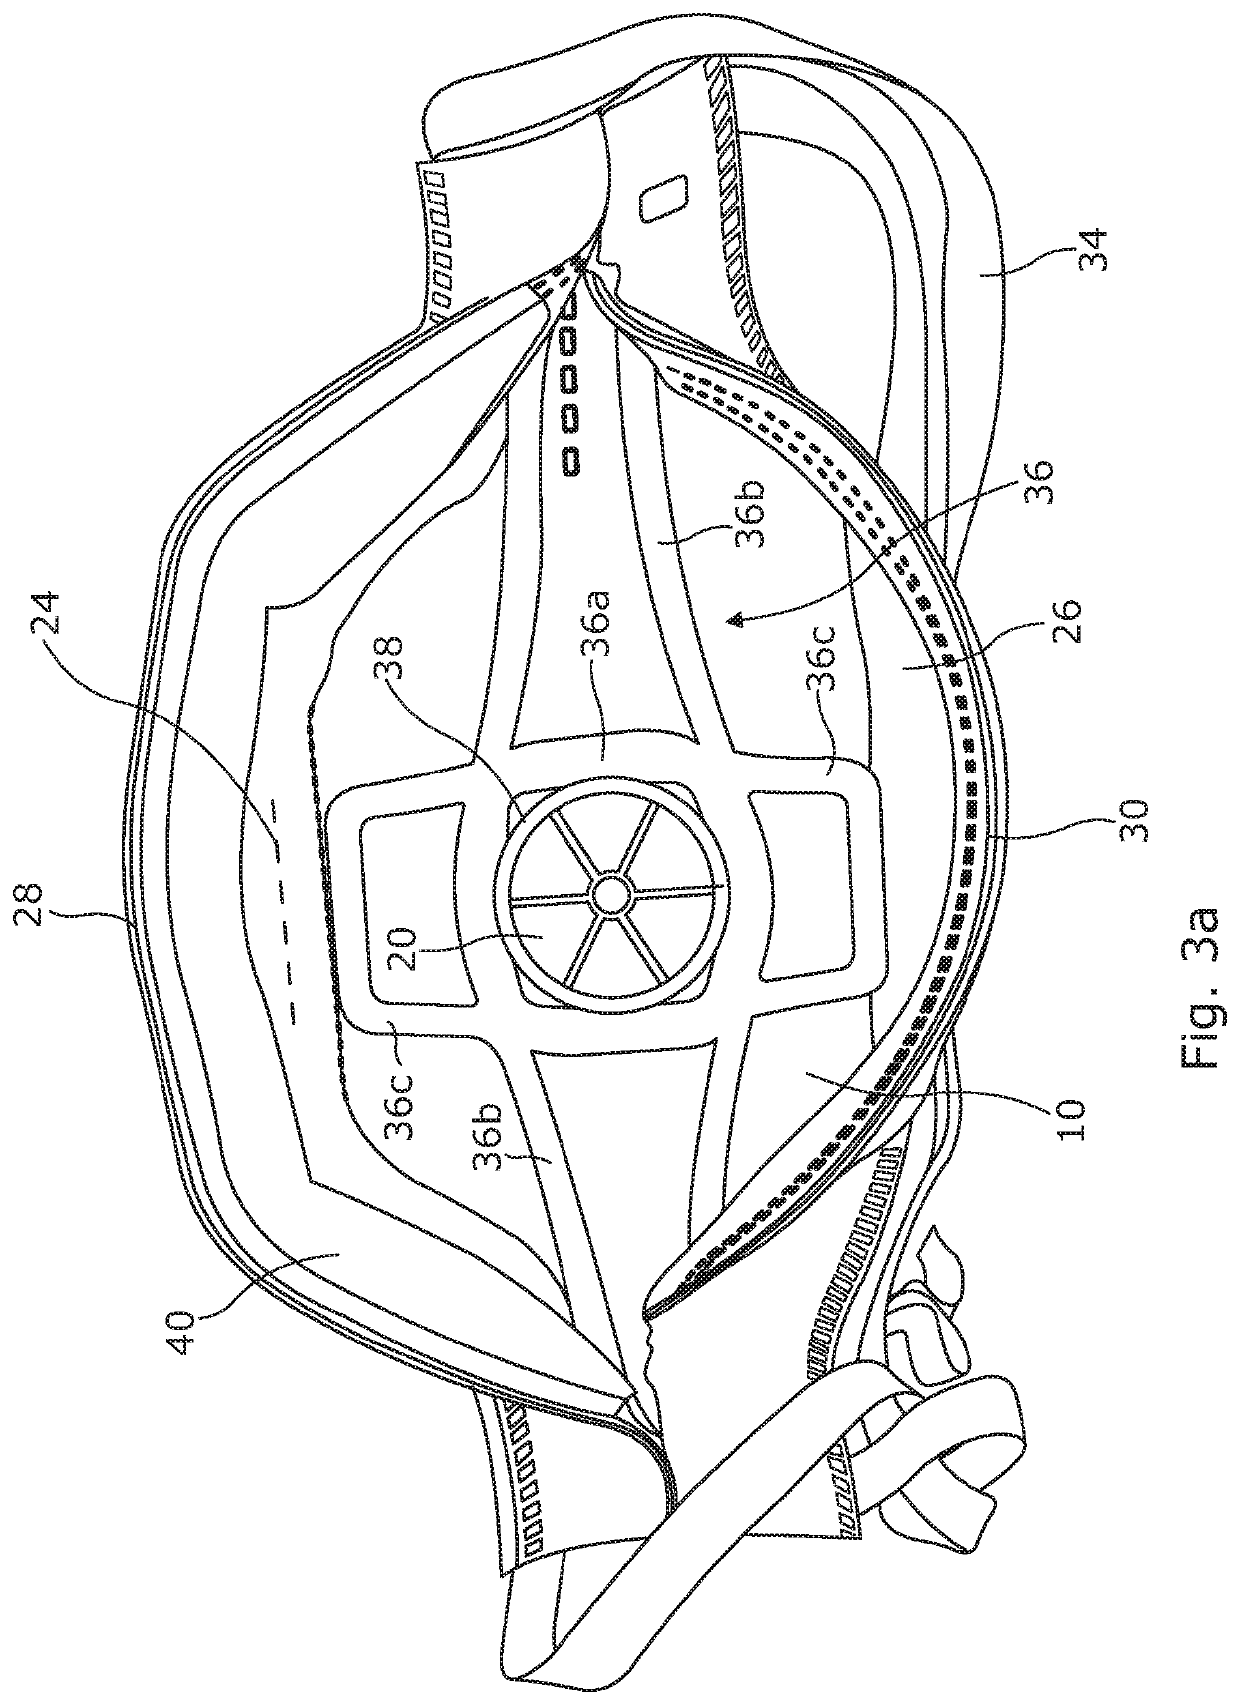 Personal respiratory protection device and method of manufacturing a personal respiratory protection device